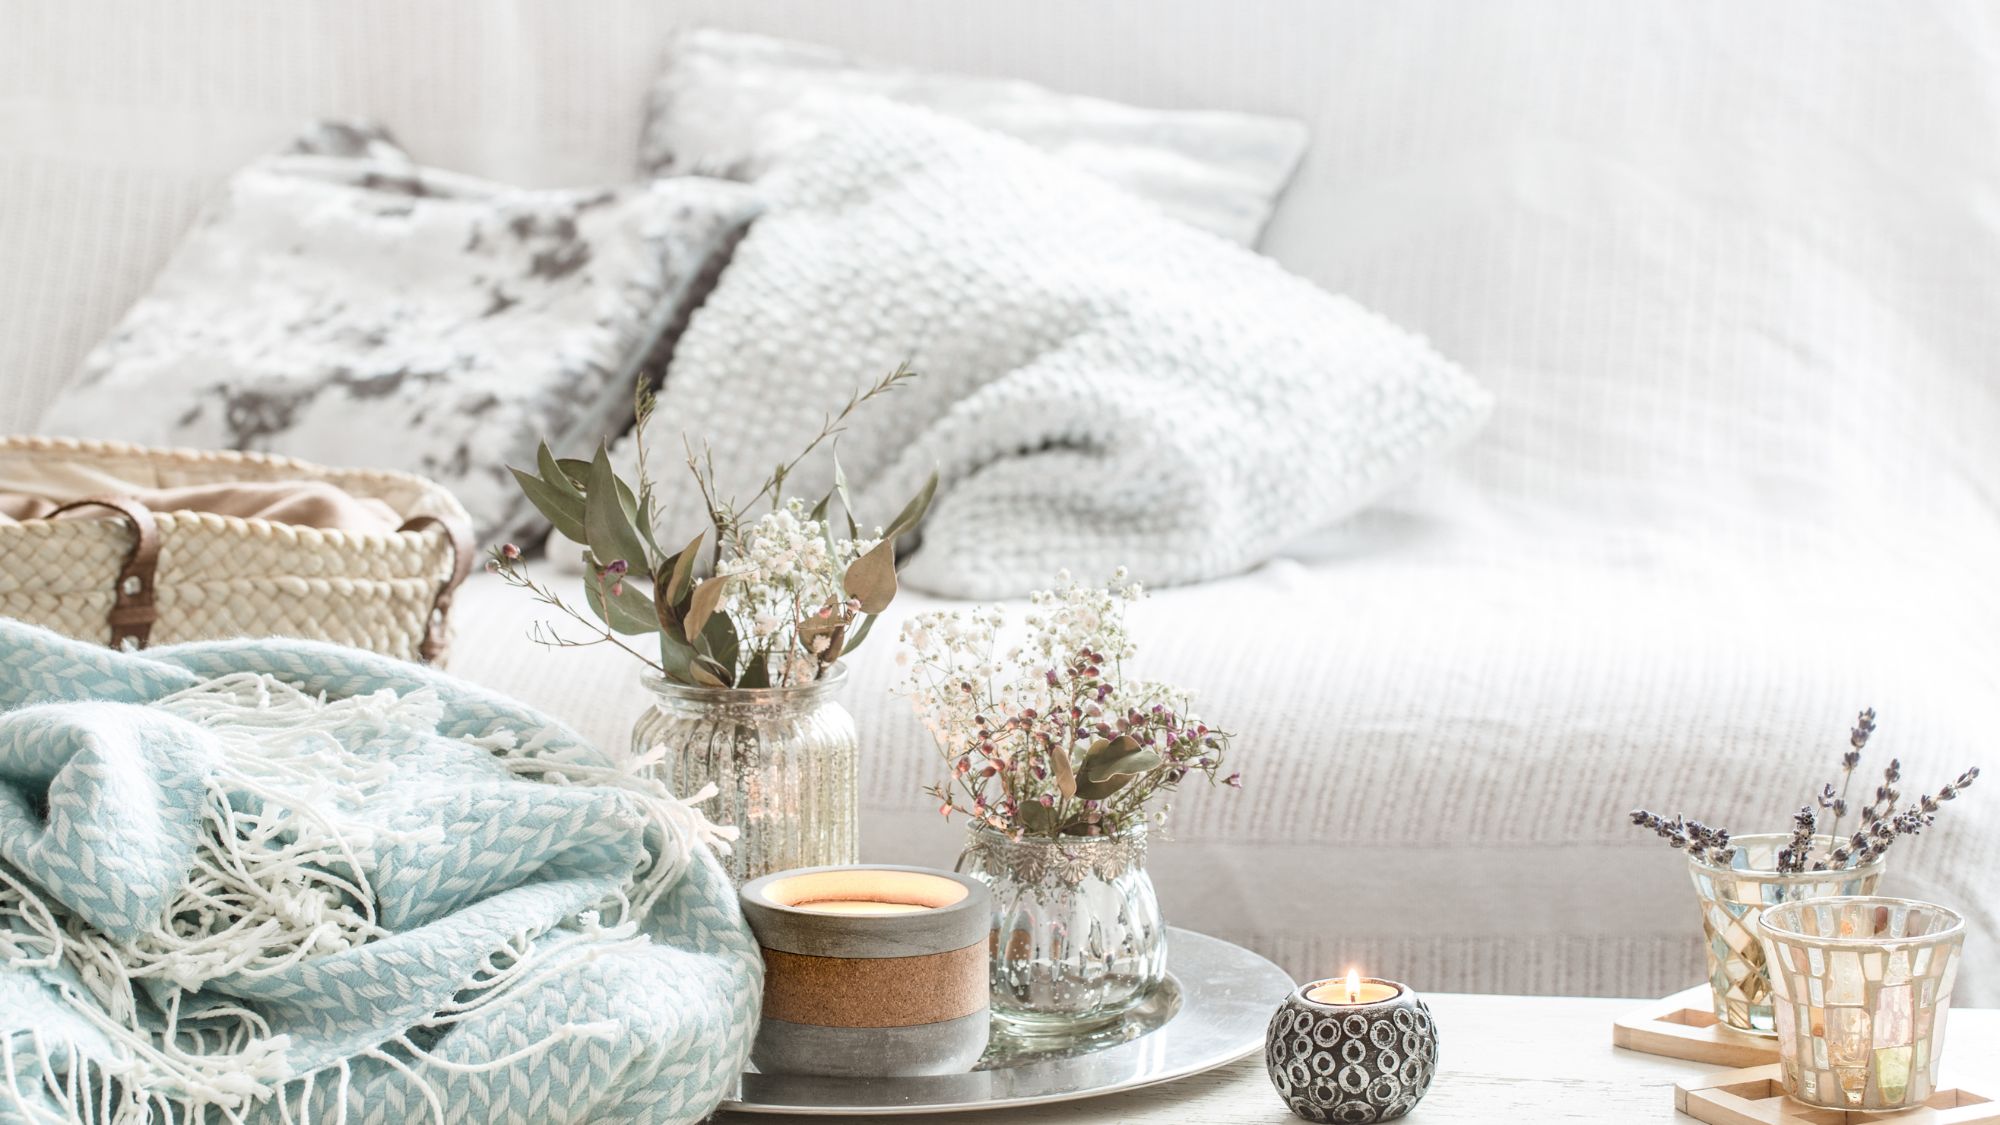 Elegant white couch adorned with a blue blanket and candles, featuring thickest tog duvet and best home textiles.